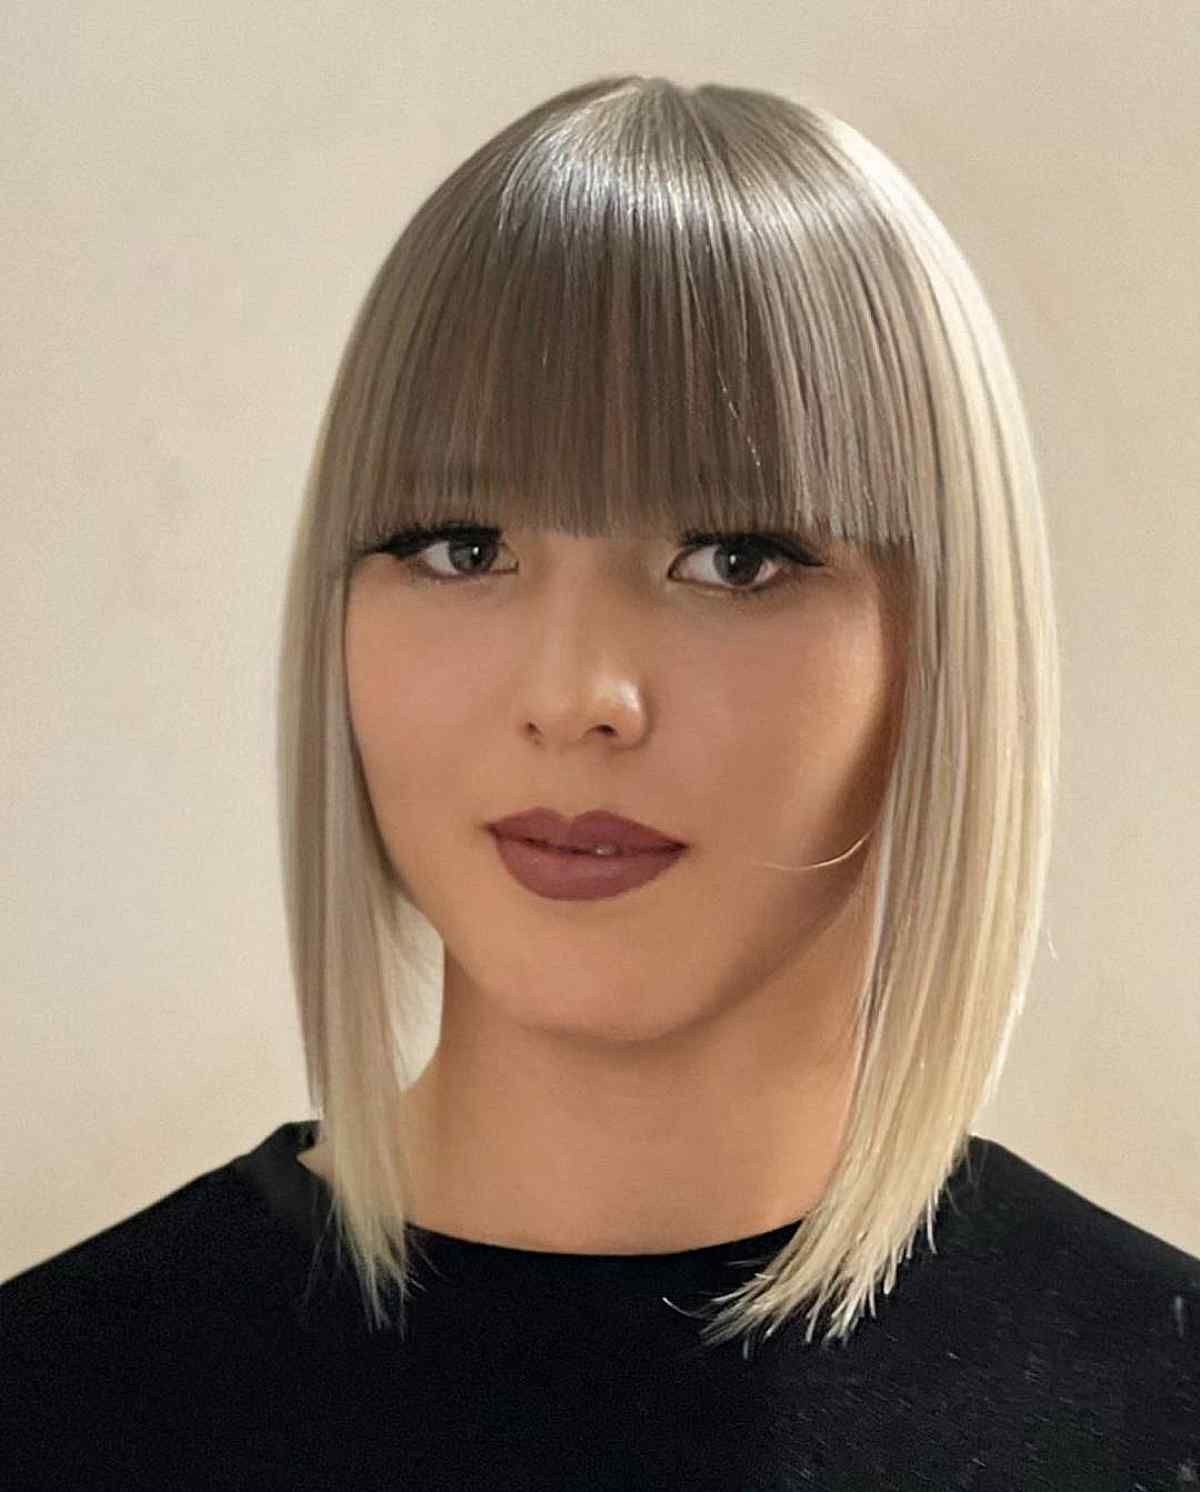 42 Trendiest Long Bob With Bangs + What To Consider Before Getting This With Regard To Fashionable Medium Bob With Long Parted Bangs (Gallery 2 of 20)